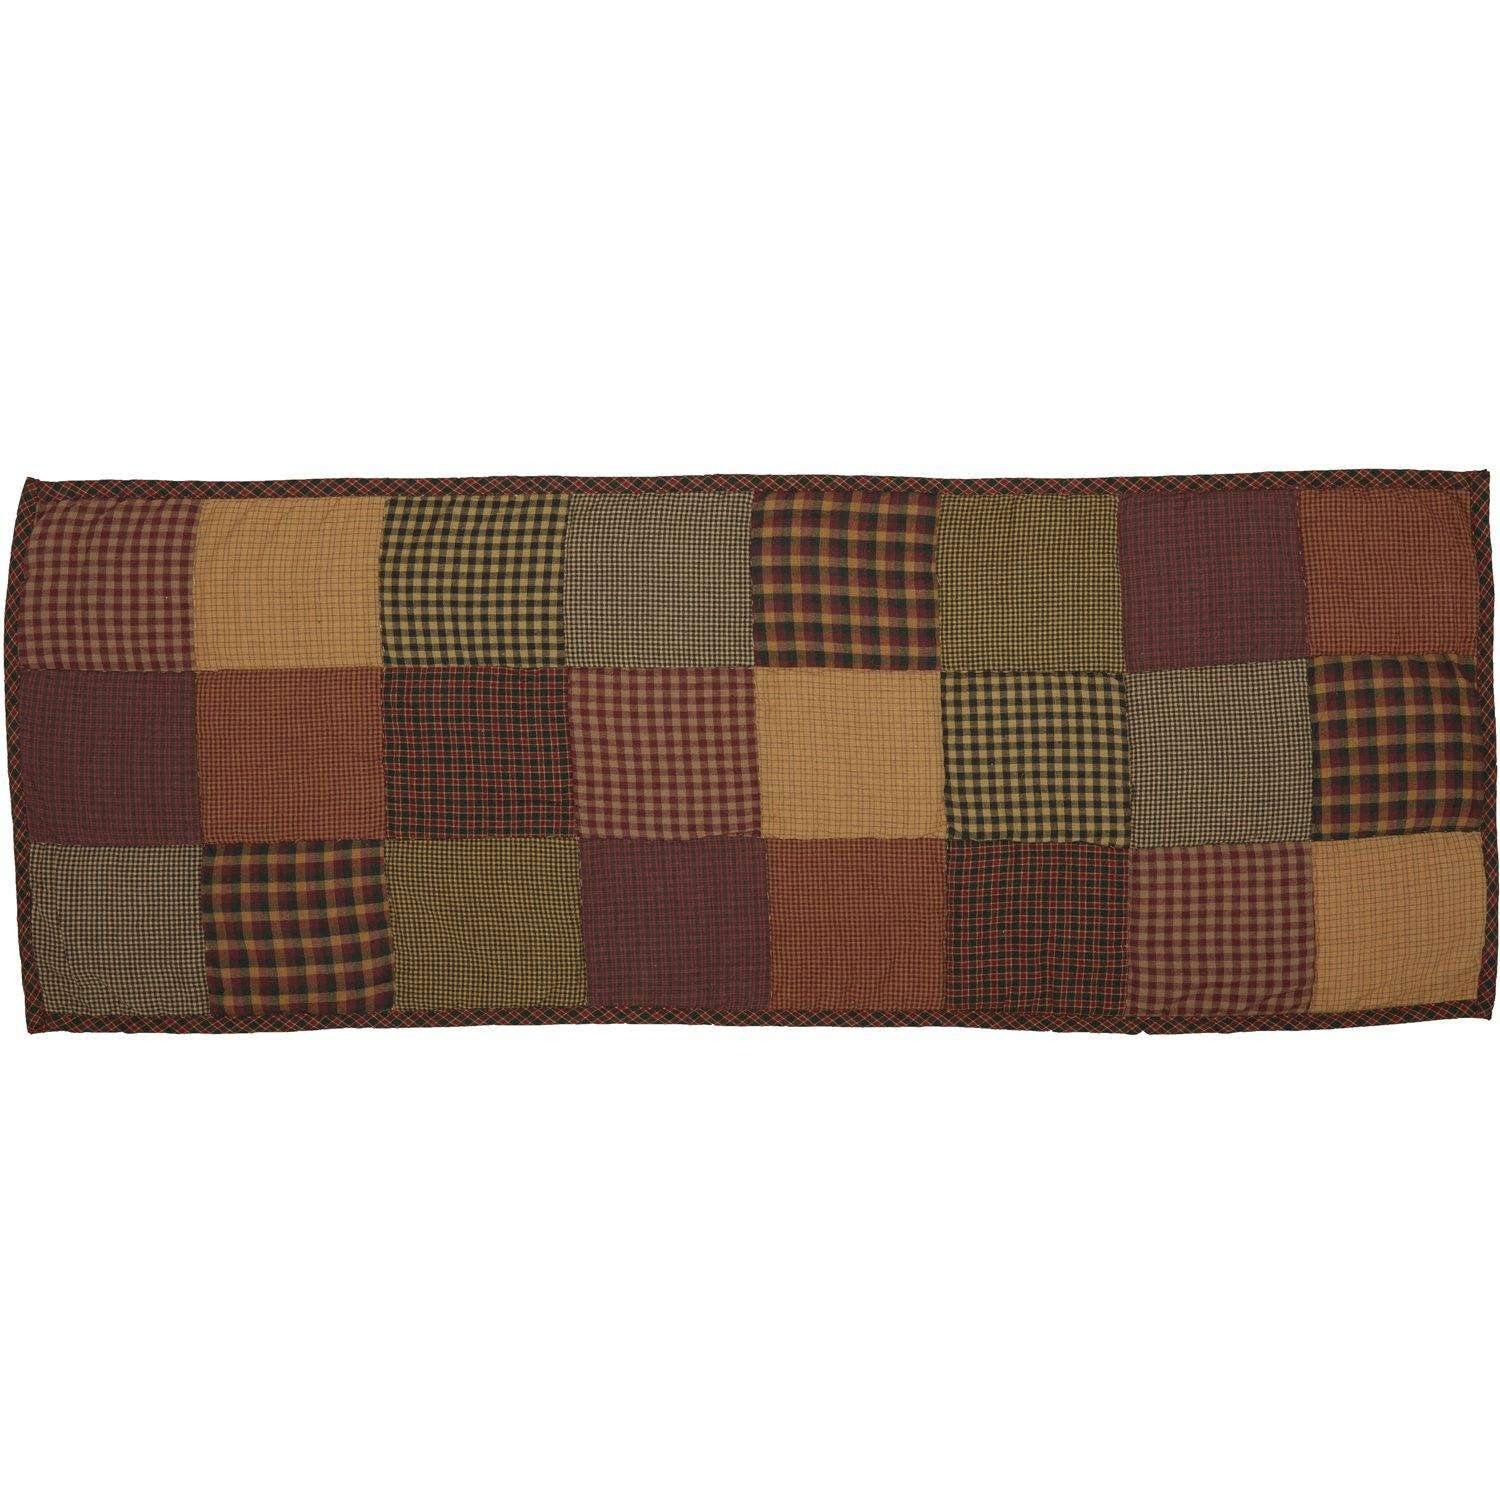 Heritage Farms Quilted Runner 13x36 VHC Brands - The Fox Decor